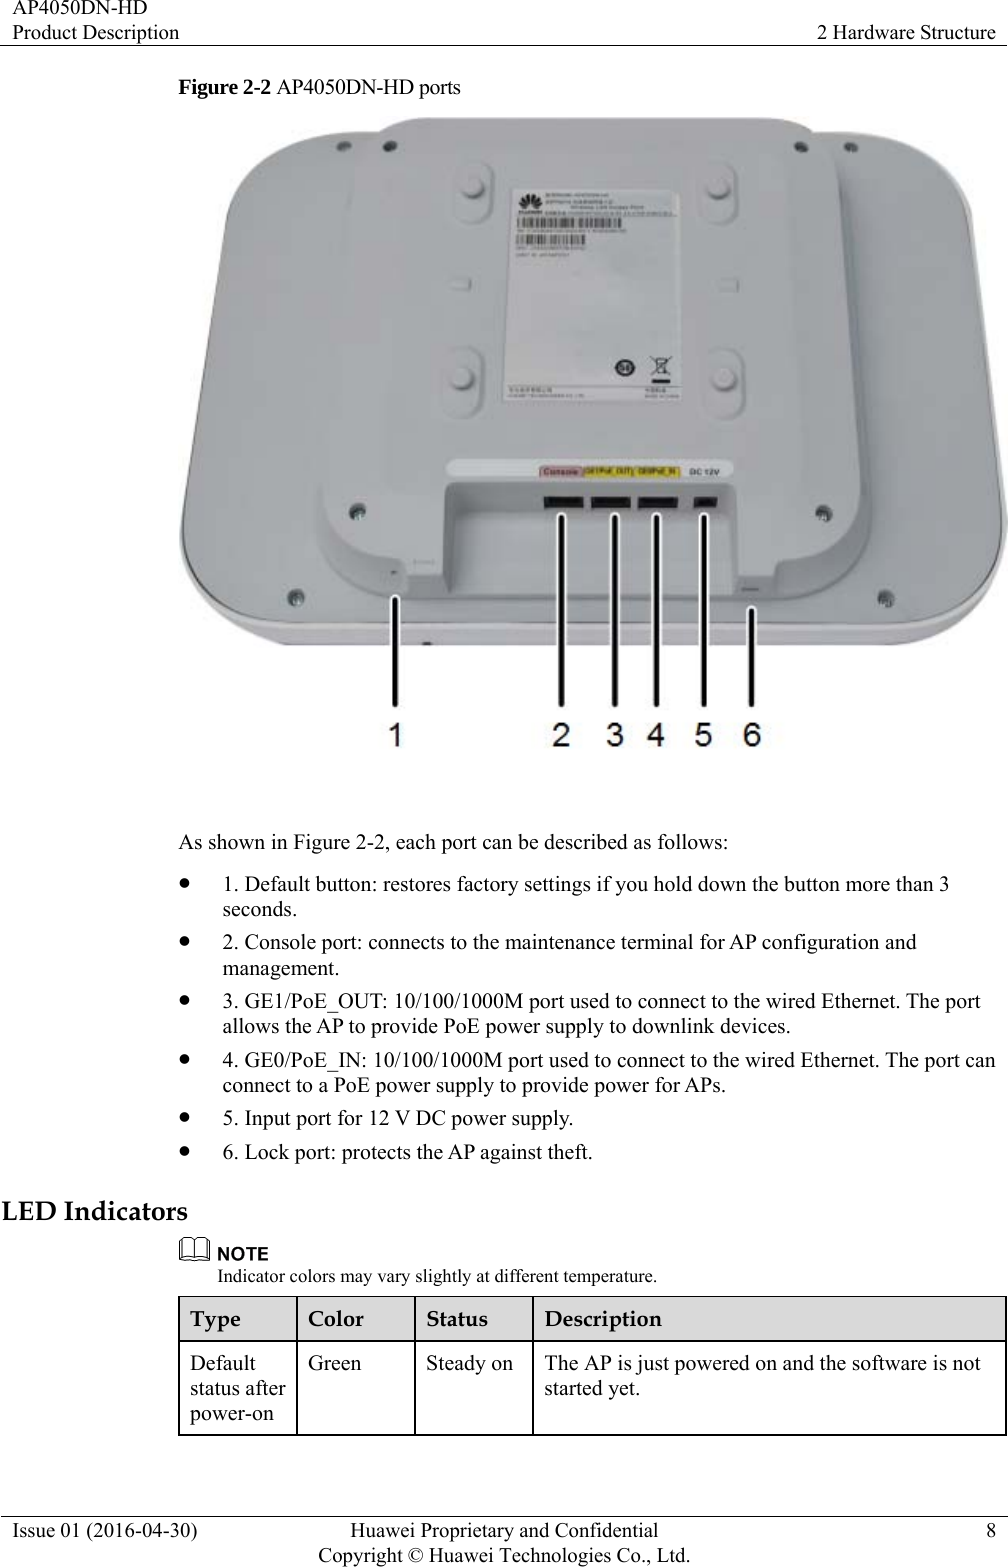 AP4050DN-HD Product Description  2 Hardware Structure Issue 01 (2016-04-30)  Huawei Proprietary and Confidential         Copyright © Huawei Technologies Co., Ltd.8 Figure 2-2 AP4050DN-HD ports   As shown in Figure 2-2, each port can be described as follows:  1. Default button: restores factory settings if you hold down the button more than 3 seconds.  2. Console port: connects to the maintenance terminal for AP configuration and management.  3. GE1/PoE_OUT: 10/100/1000M port used to connect to the wired Ethernet. The port allows the AP to provide PoE power supply to downlink devices.  4. GE0/PoE_IN: 10/100/1000M port used to connect to the wired Ethernet. The port can connect to a PoE power supply to provide power for APs.  5. Input port for 12 V DC power supply.  6. Lock port: protects the AP against theft. LED Indicators  Indicator colors may vary slightly at different temperature. Type  Color  Status  Description Default status after power-on Green  Steady on  The AP is just powered on and the software is not started yet. 